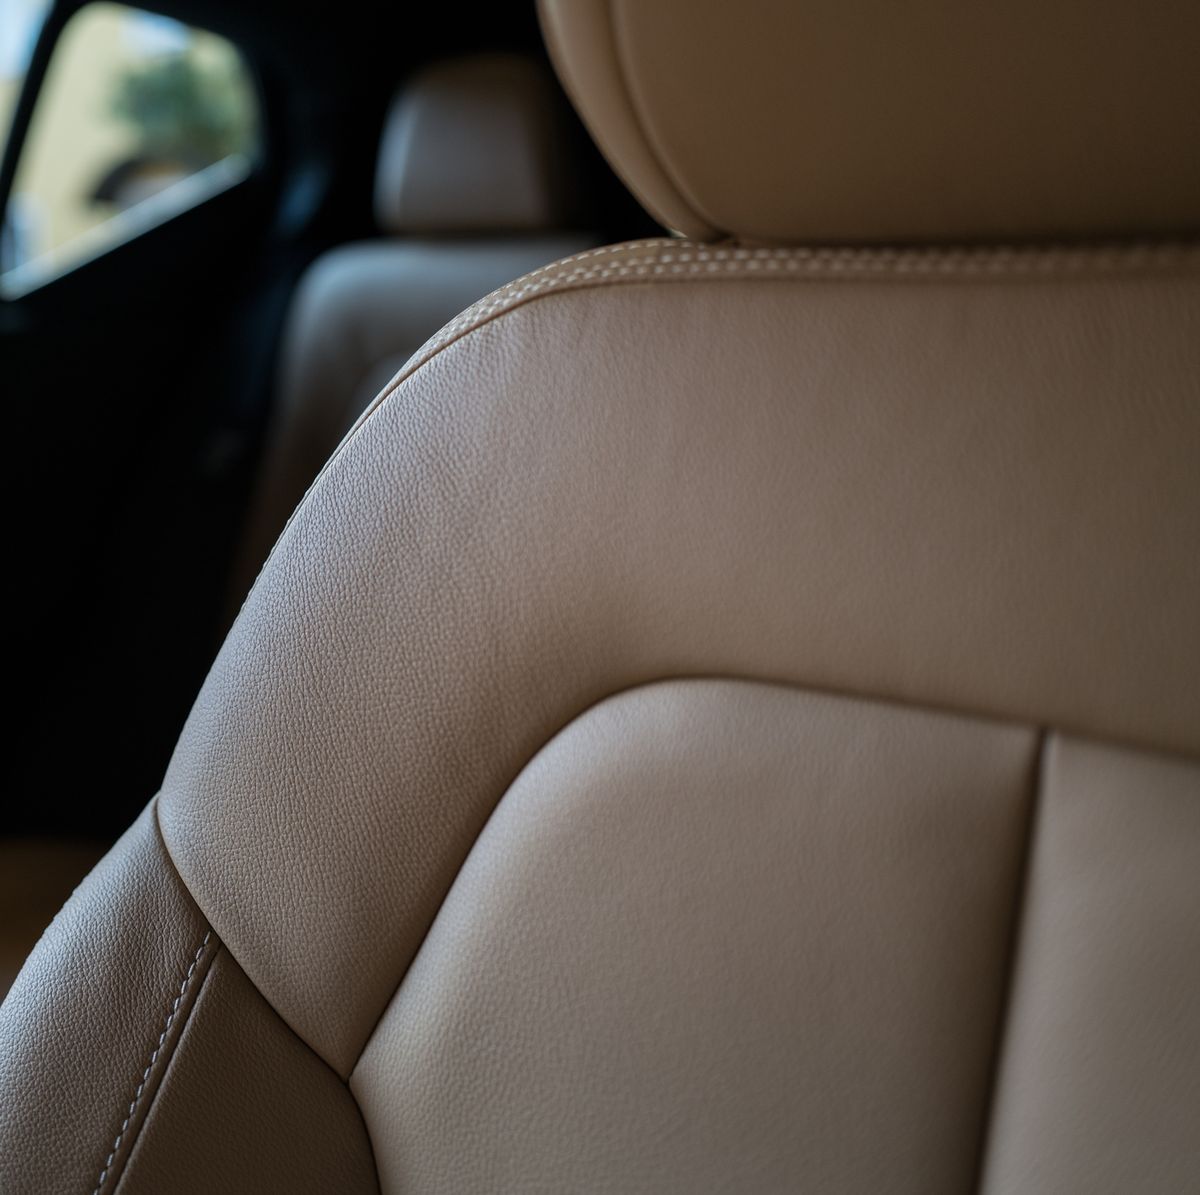 The Top Seat Covers for Your Vehicle